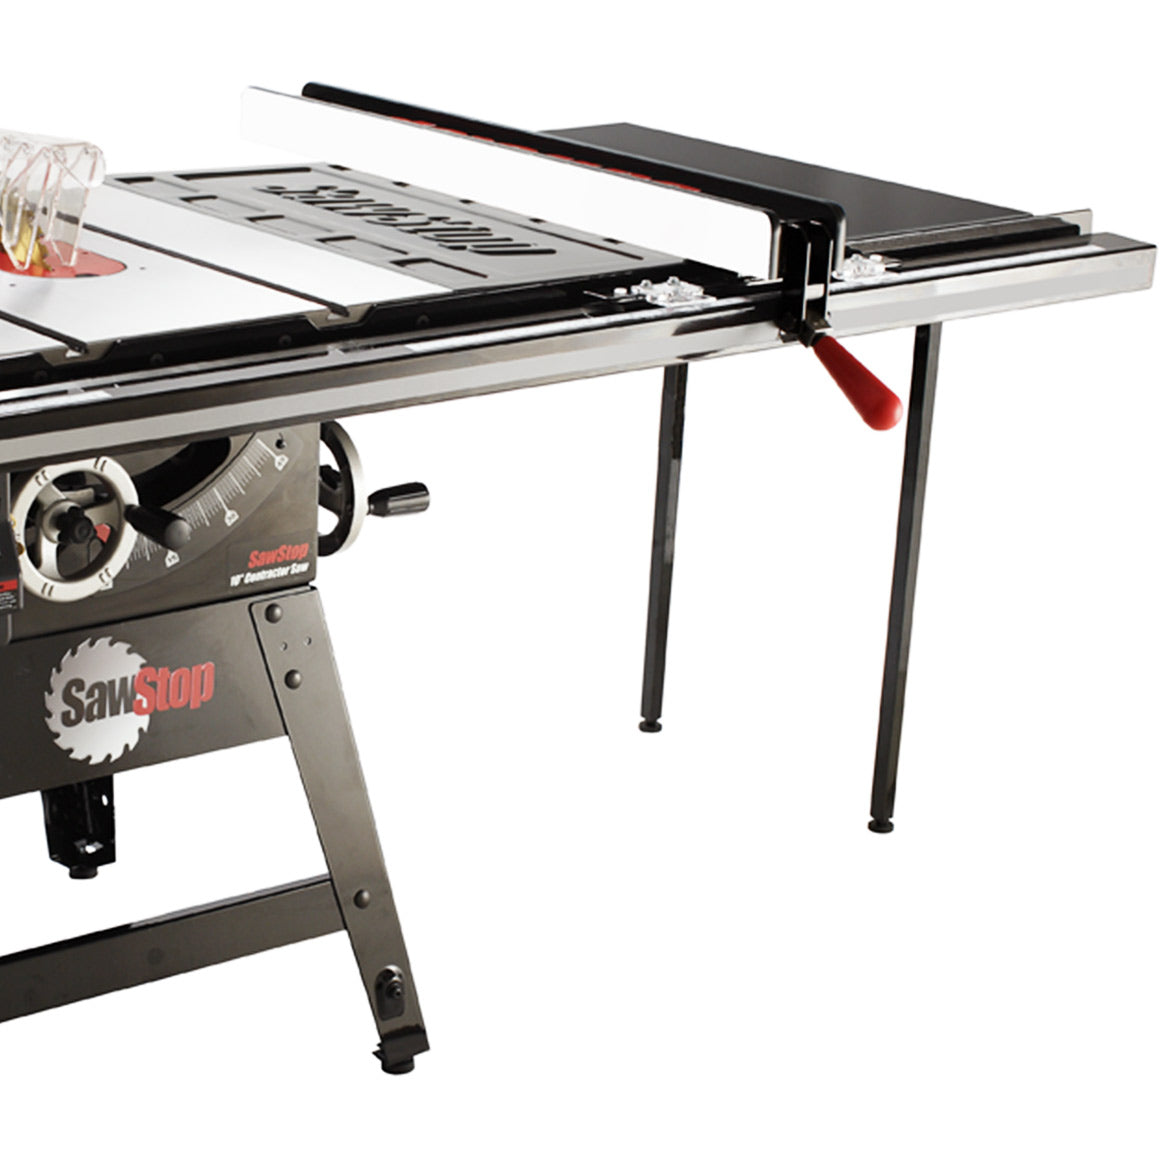 sawstop-cns175-tgp236-110-volt-36-inch-contractor-t-glide-table-saw-fe